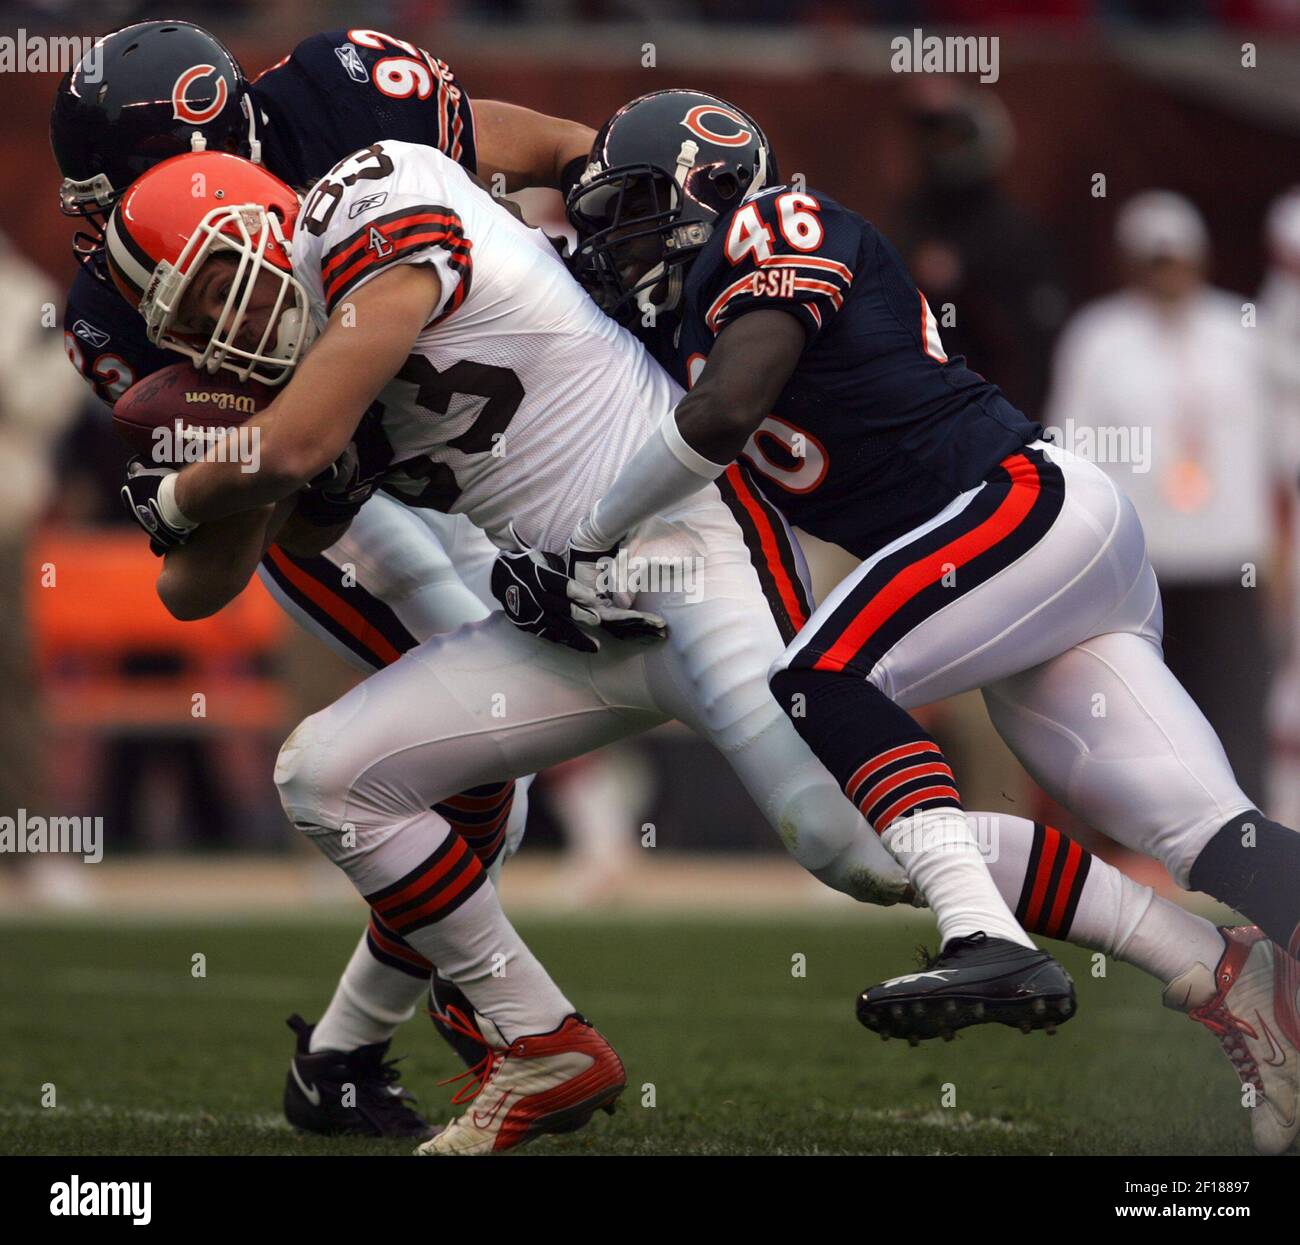 KRT SPORTS STORY SLUGGED: FBN-BEARS-BROWNS KRT PHOTOGRAPH BY MIKE  CARDEW/AKRON BEACON JOURNAL (October 9) CLEVELAND, OH -- Cleveland Browns  tight end Aaron Shea tries to advance the ball through Chicago Bears  linebacker